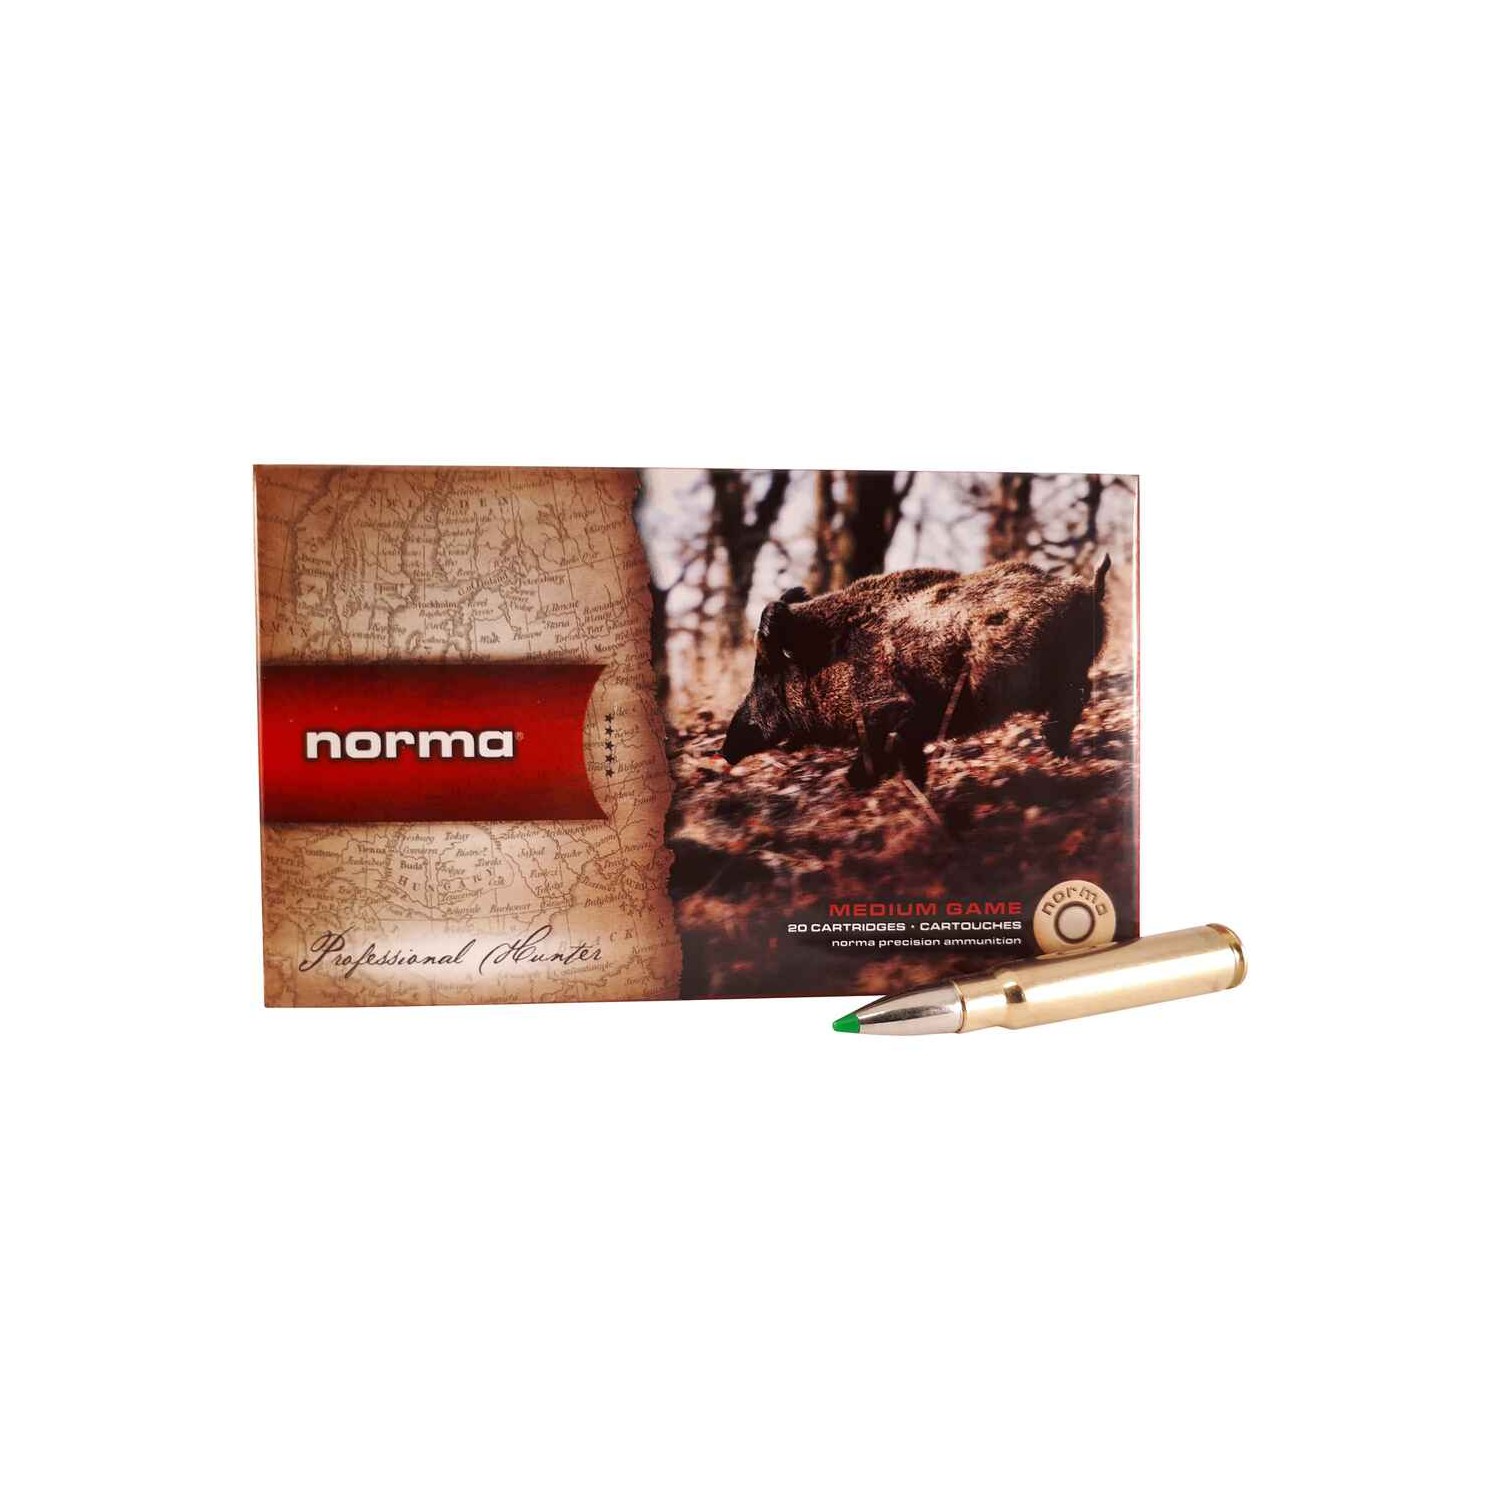 8x57 IS Ecostrike 10,3g/160grs. Norma